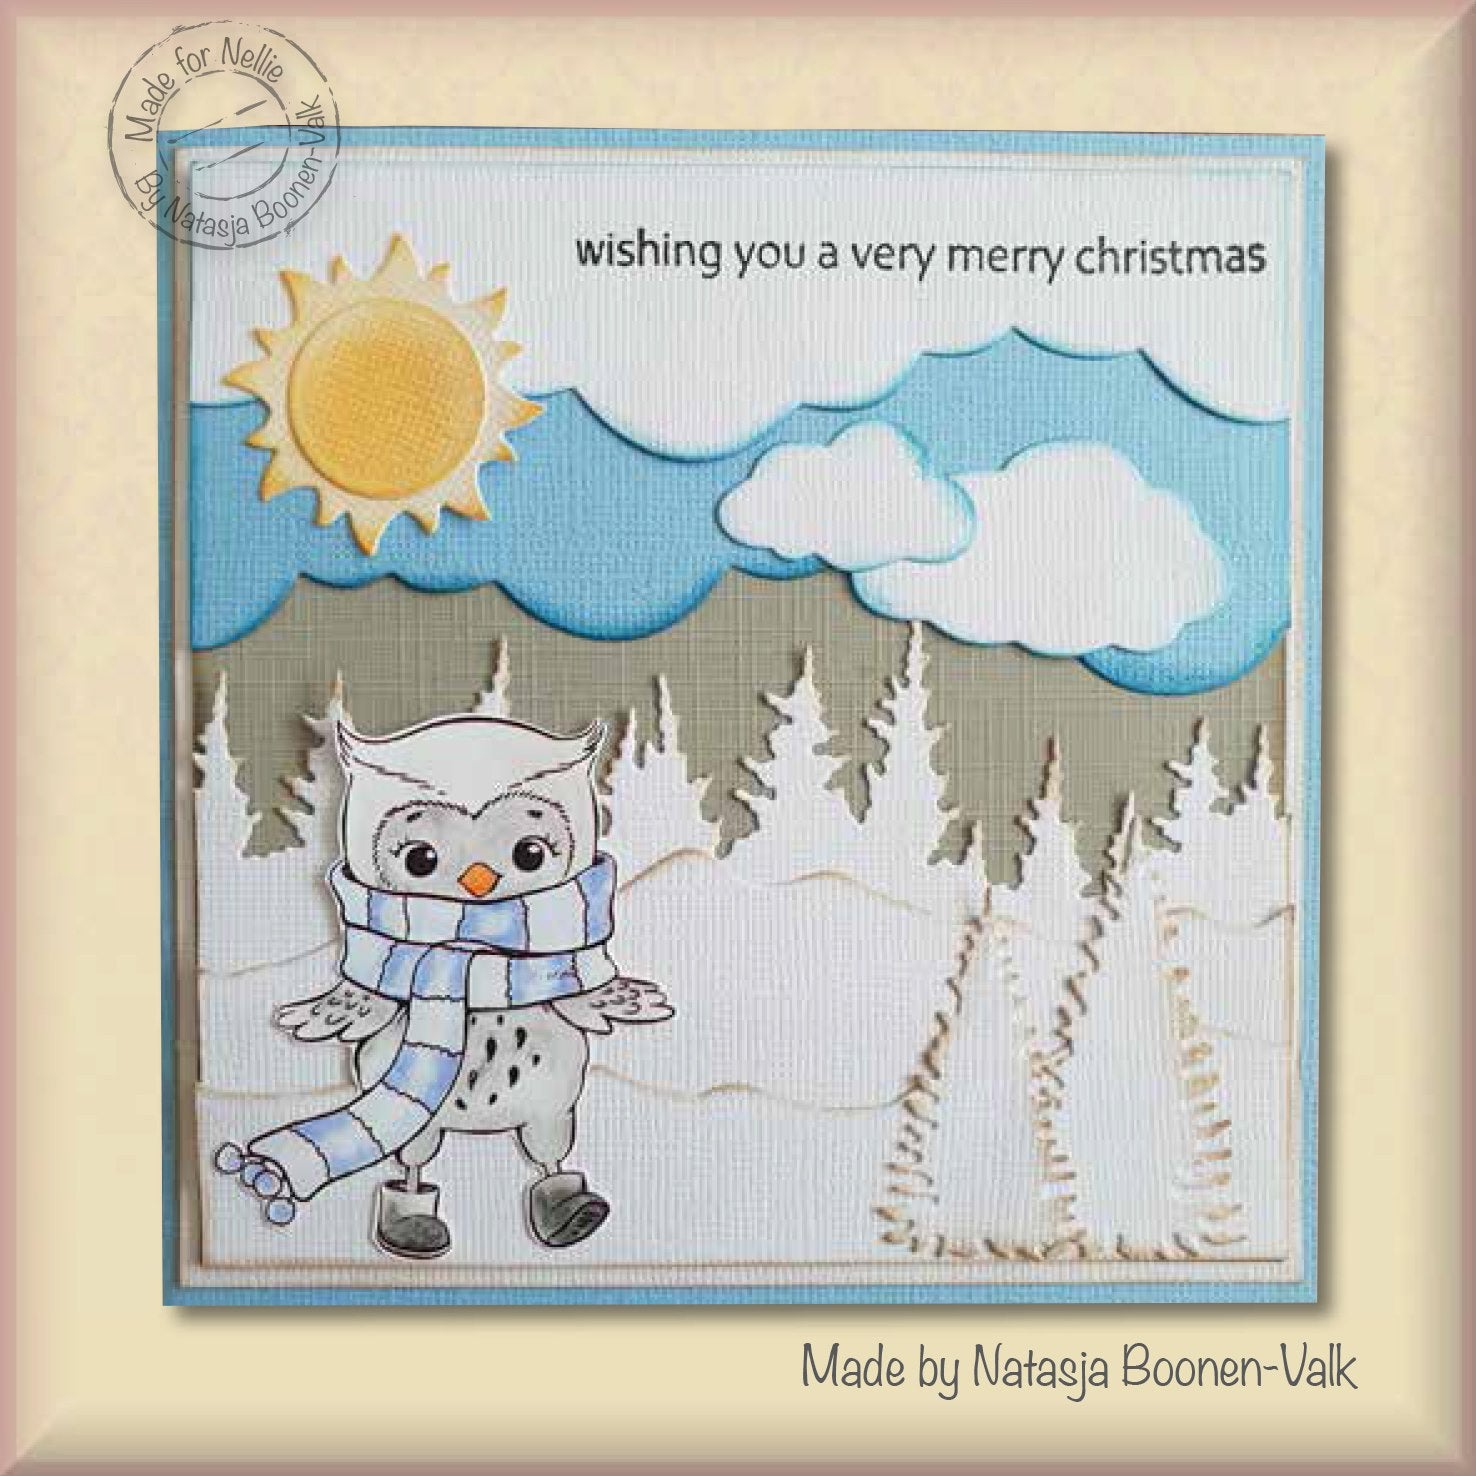 Nellie's Choice Clear Stamp Christmas Cuties Owl With Winter-Scarf